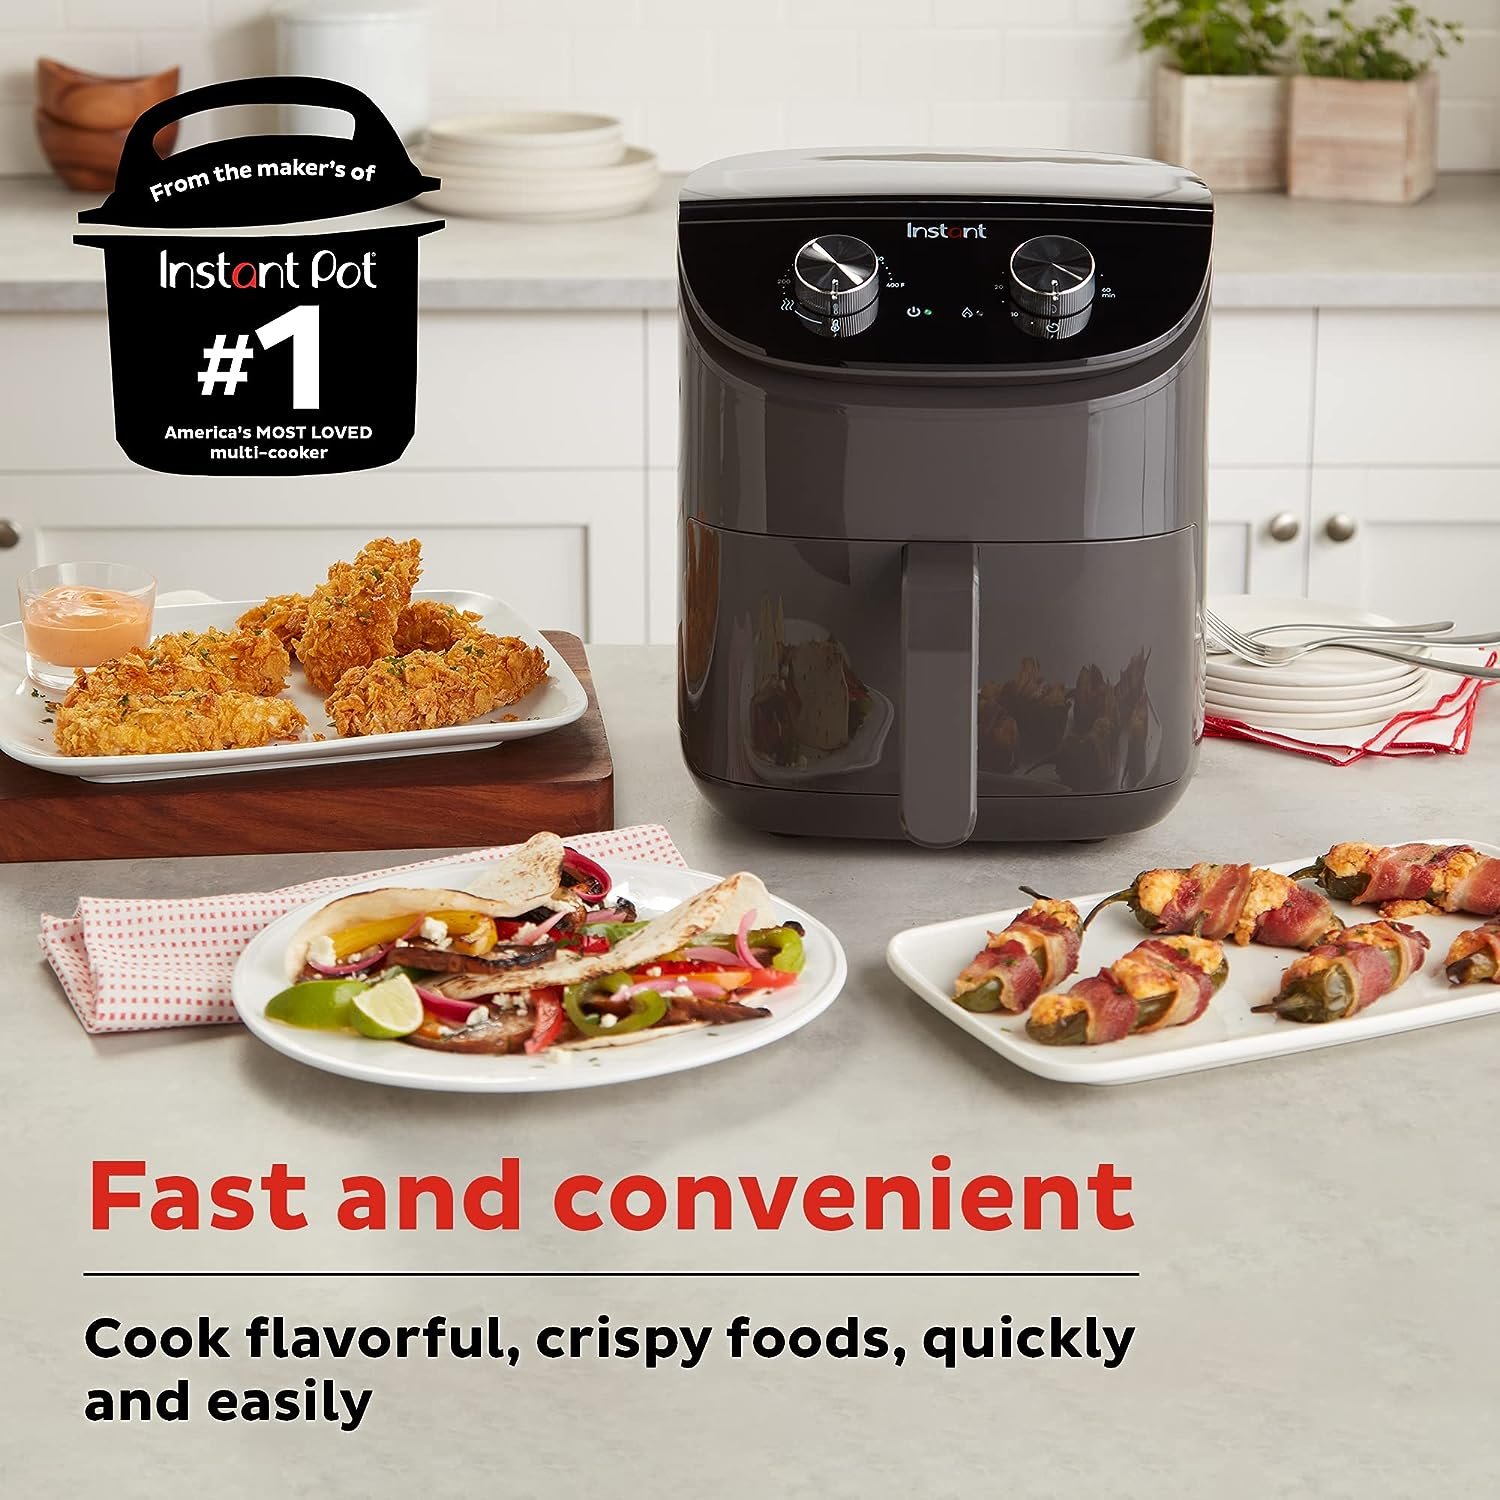 Instant Essentials 4QT Air Fryer Oven, From the Makers of Instant Pot with EvenCrisp Technology, Nonstick and Dishwasher-Safe Basket, Fast Cooking, Easy-to-Use, Includes Free App with over 100 Recipes